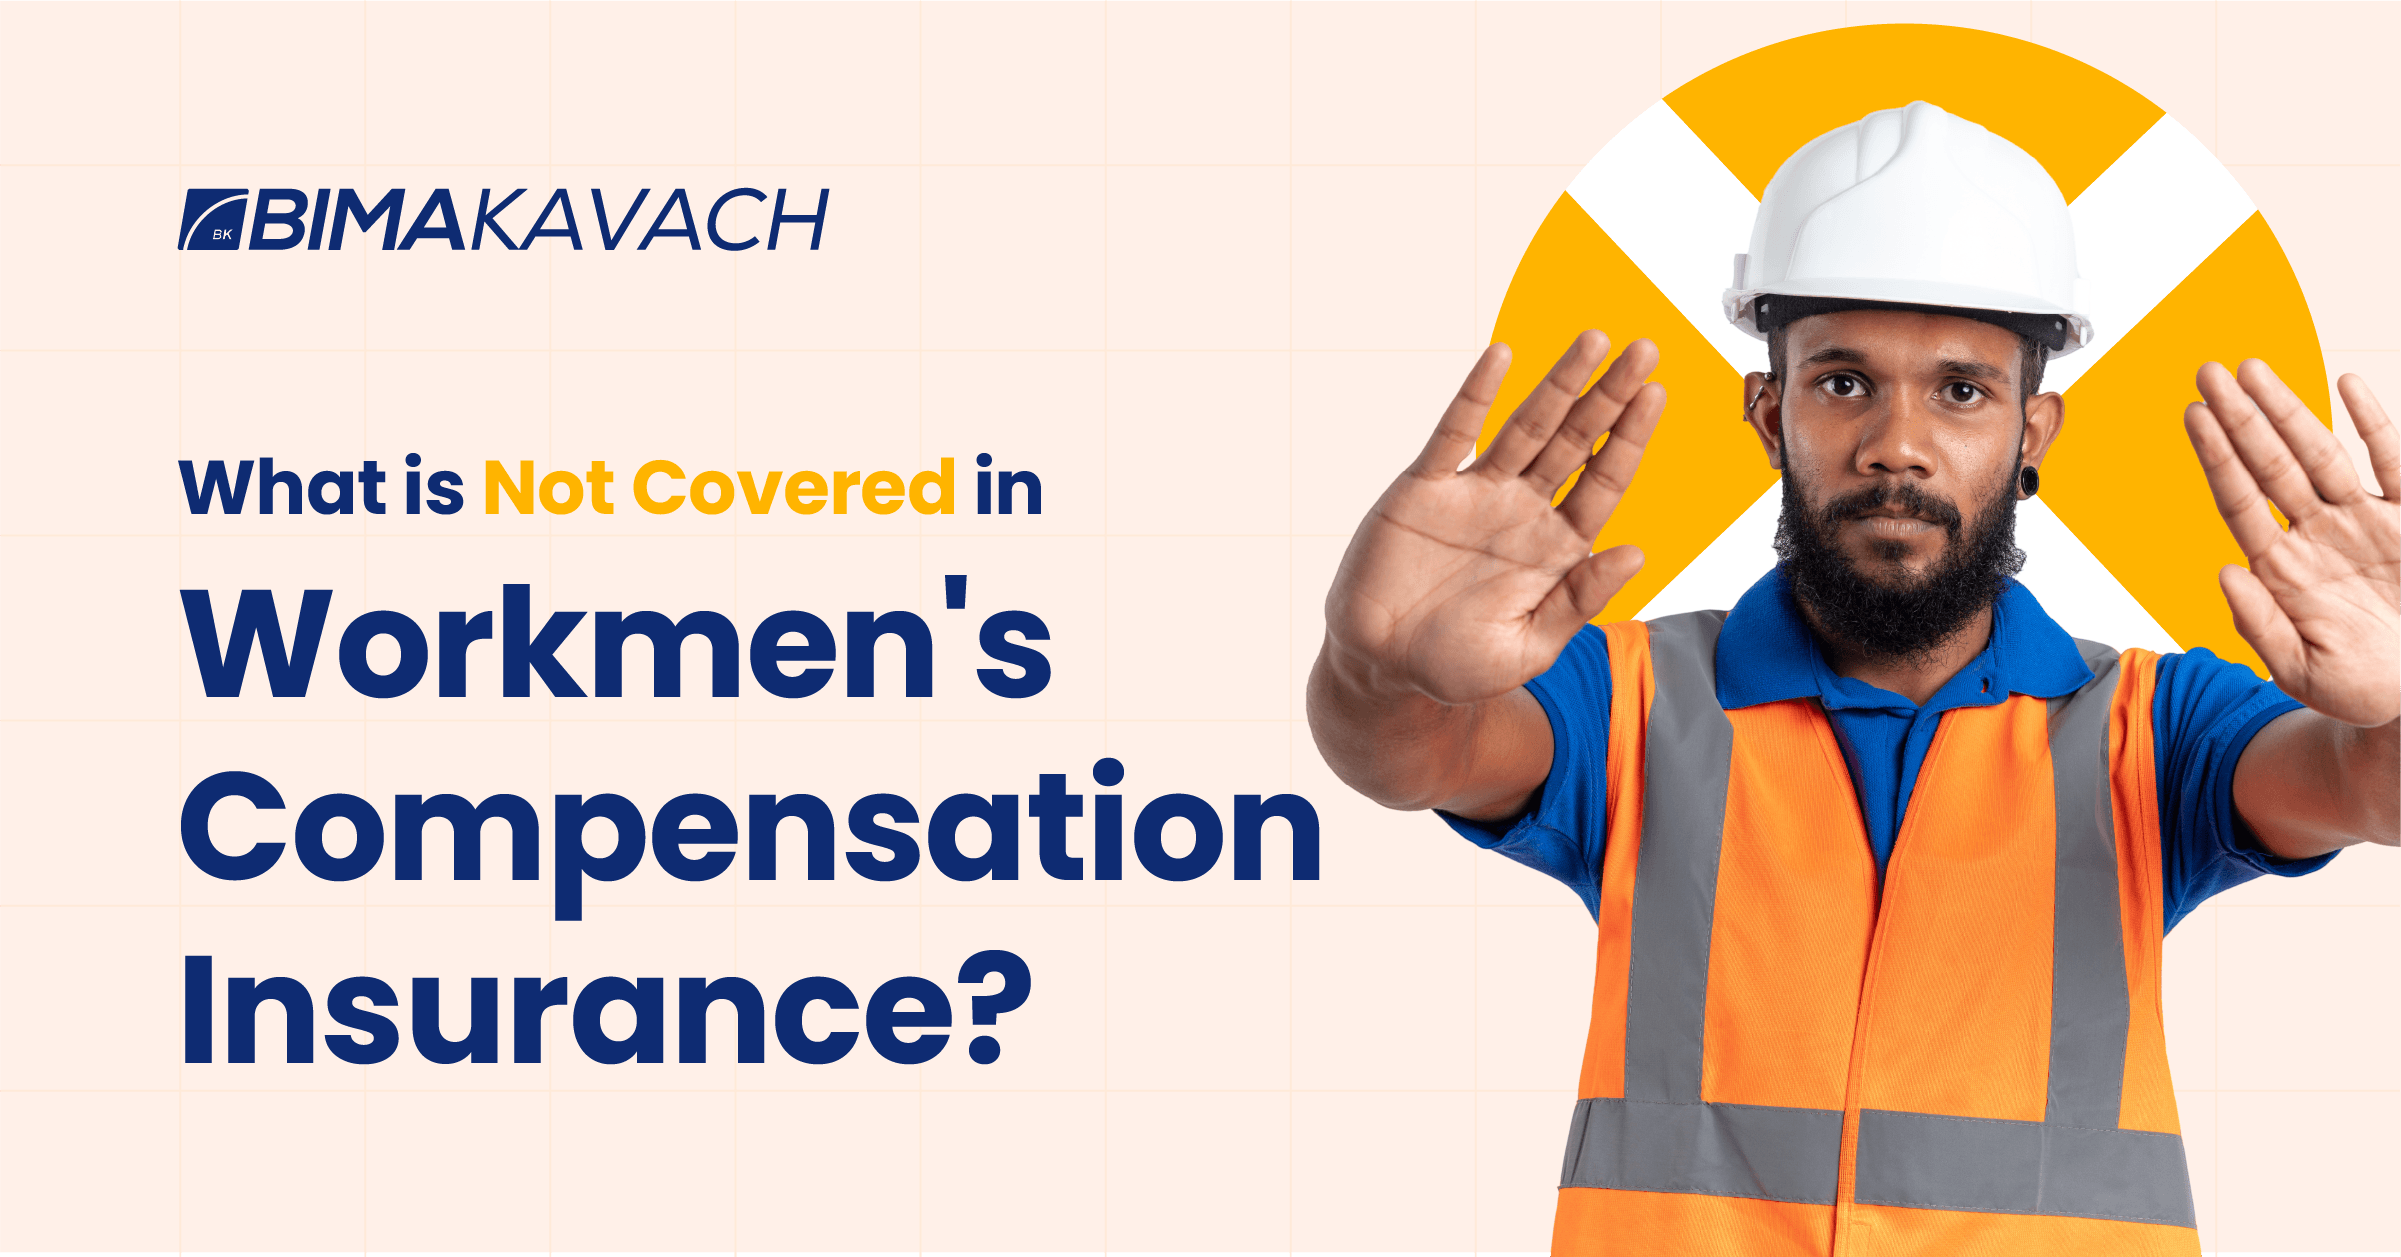 What is Not Covered in Workmen's Compensation Insurance?